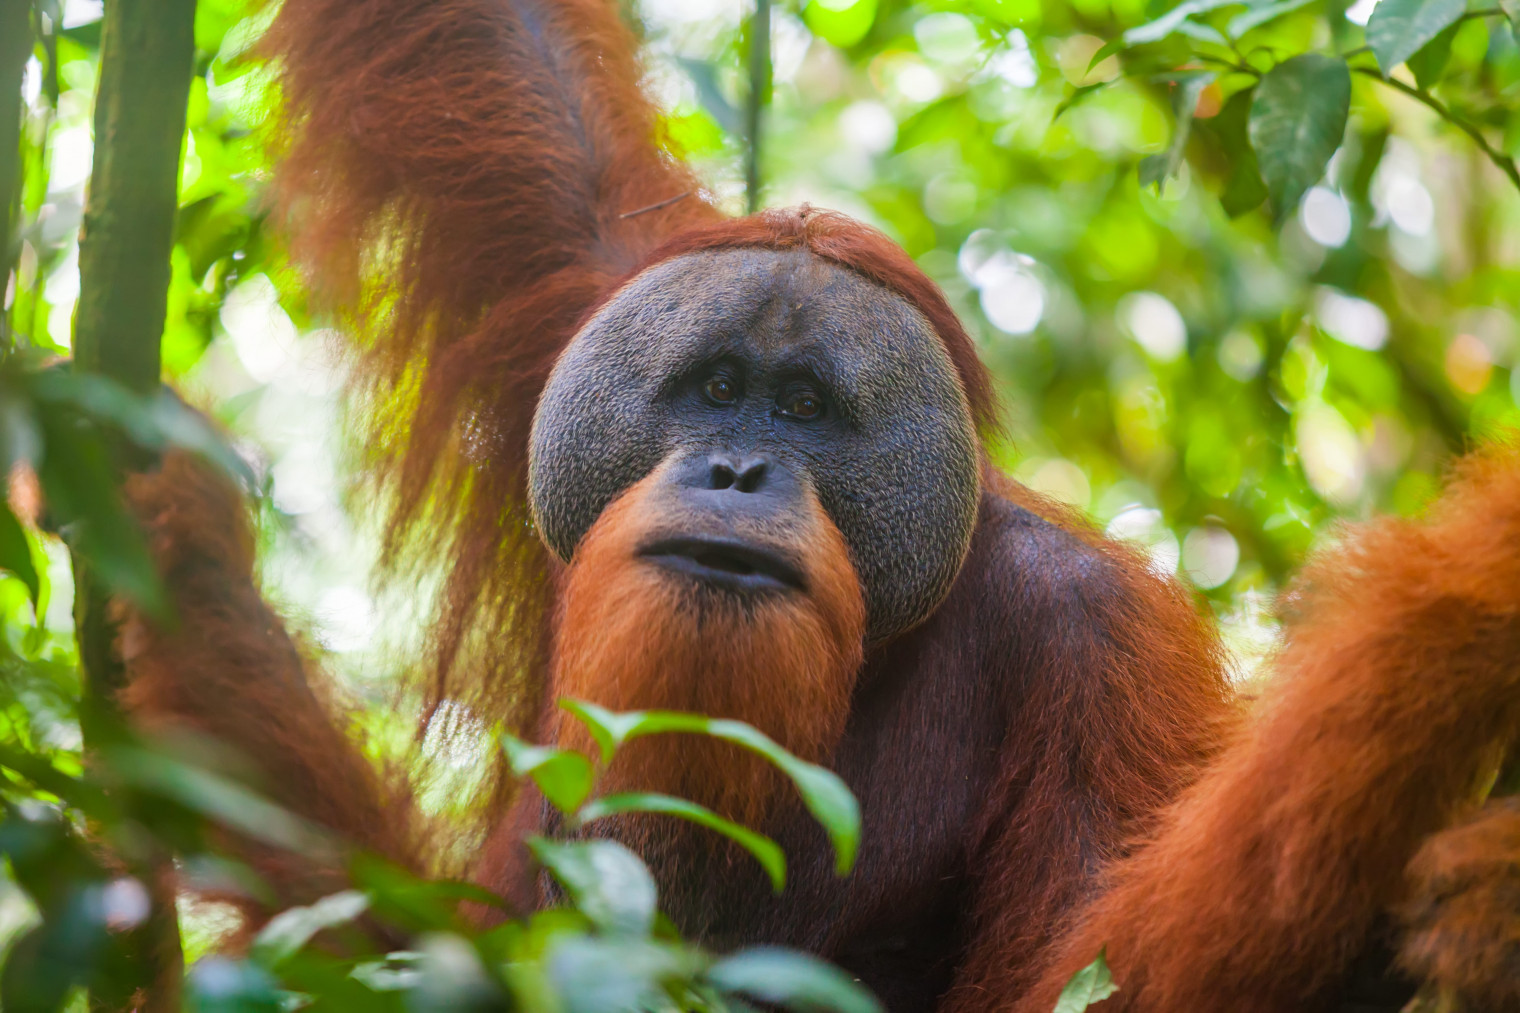 Sights &amp; Sounds of the Borneo Jungle with Norad Travel